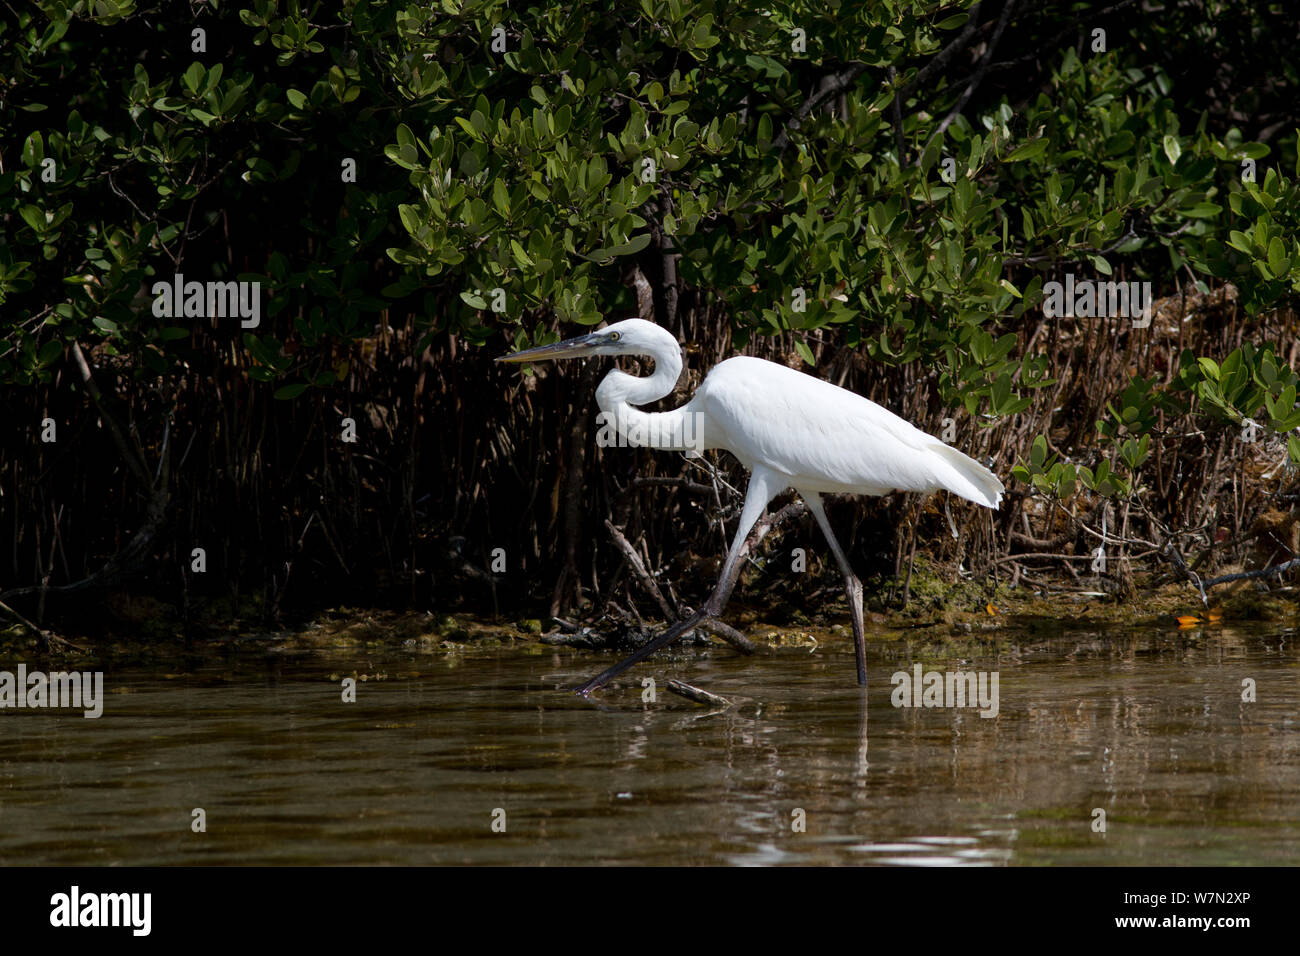 Great White Heron (Ardea herodias occidentalis) in saltwater shallows, by Red Mangrove (Rhizophora mangle) prop roots. Florida Keys, Florida, USA, March. Stock Photo